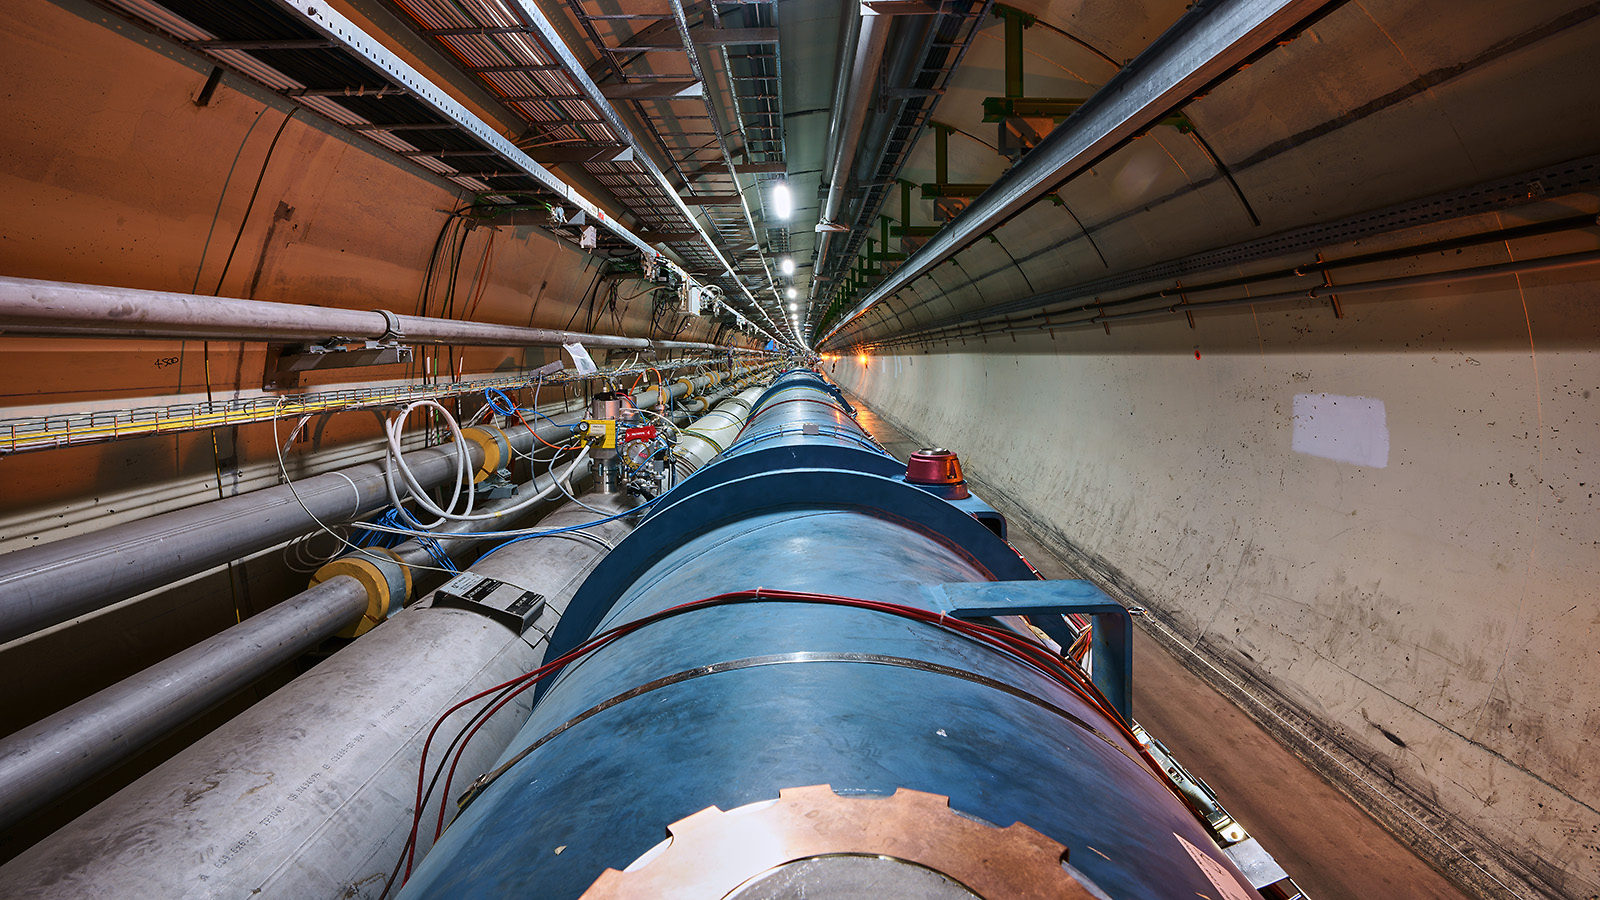 The LHC stretches into the distance